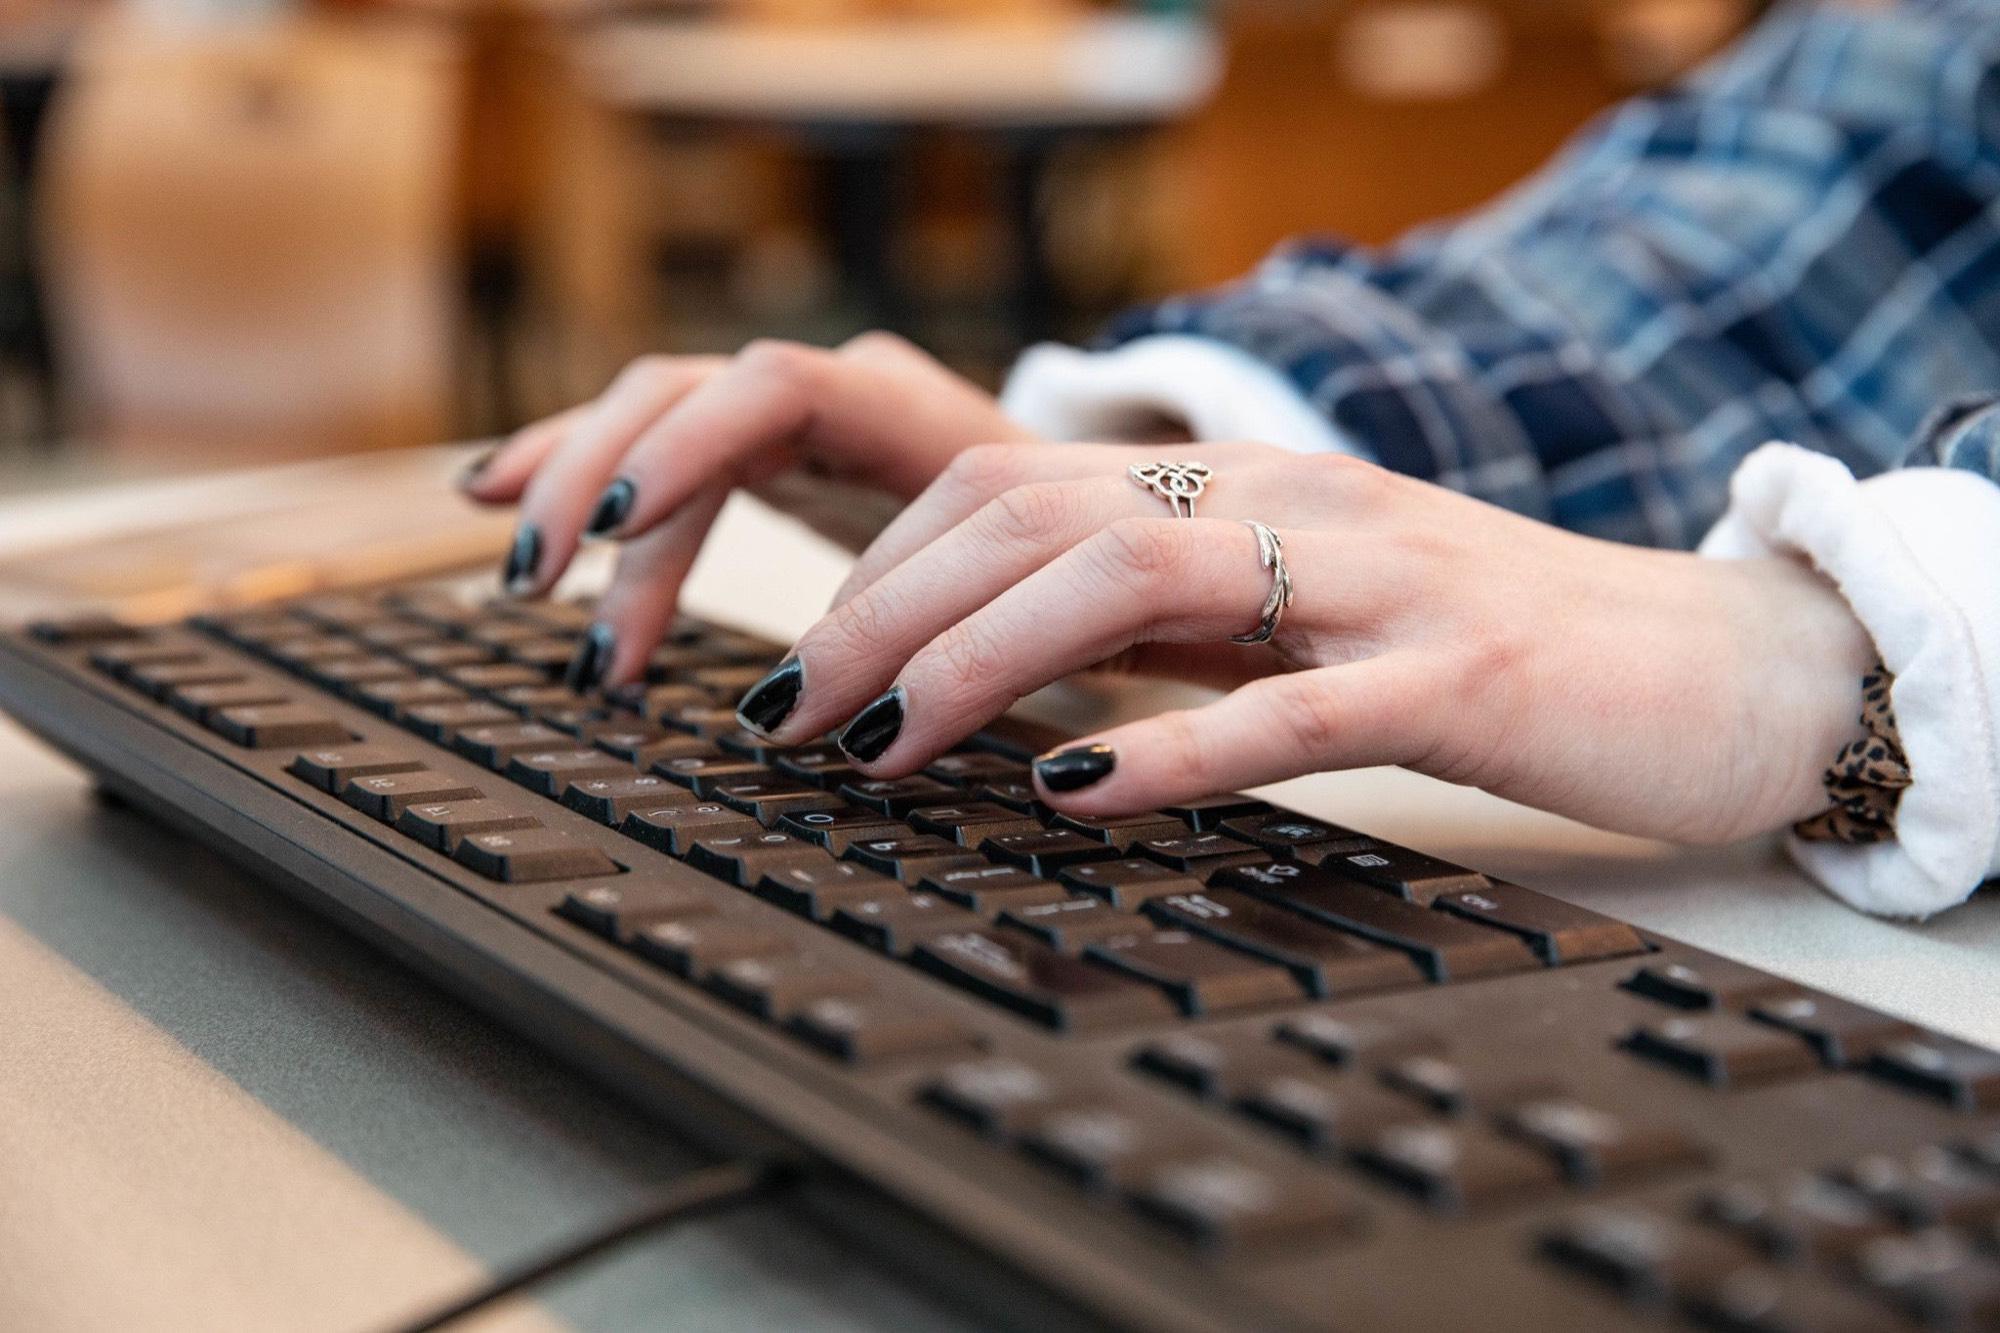 Fingers typing on a keyboard